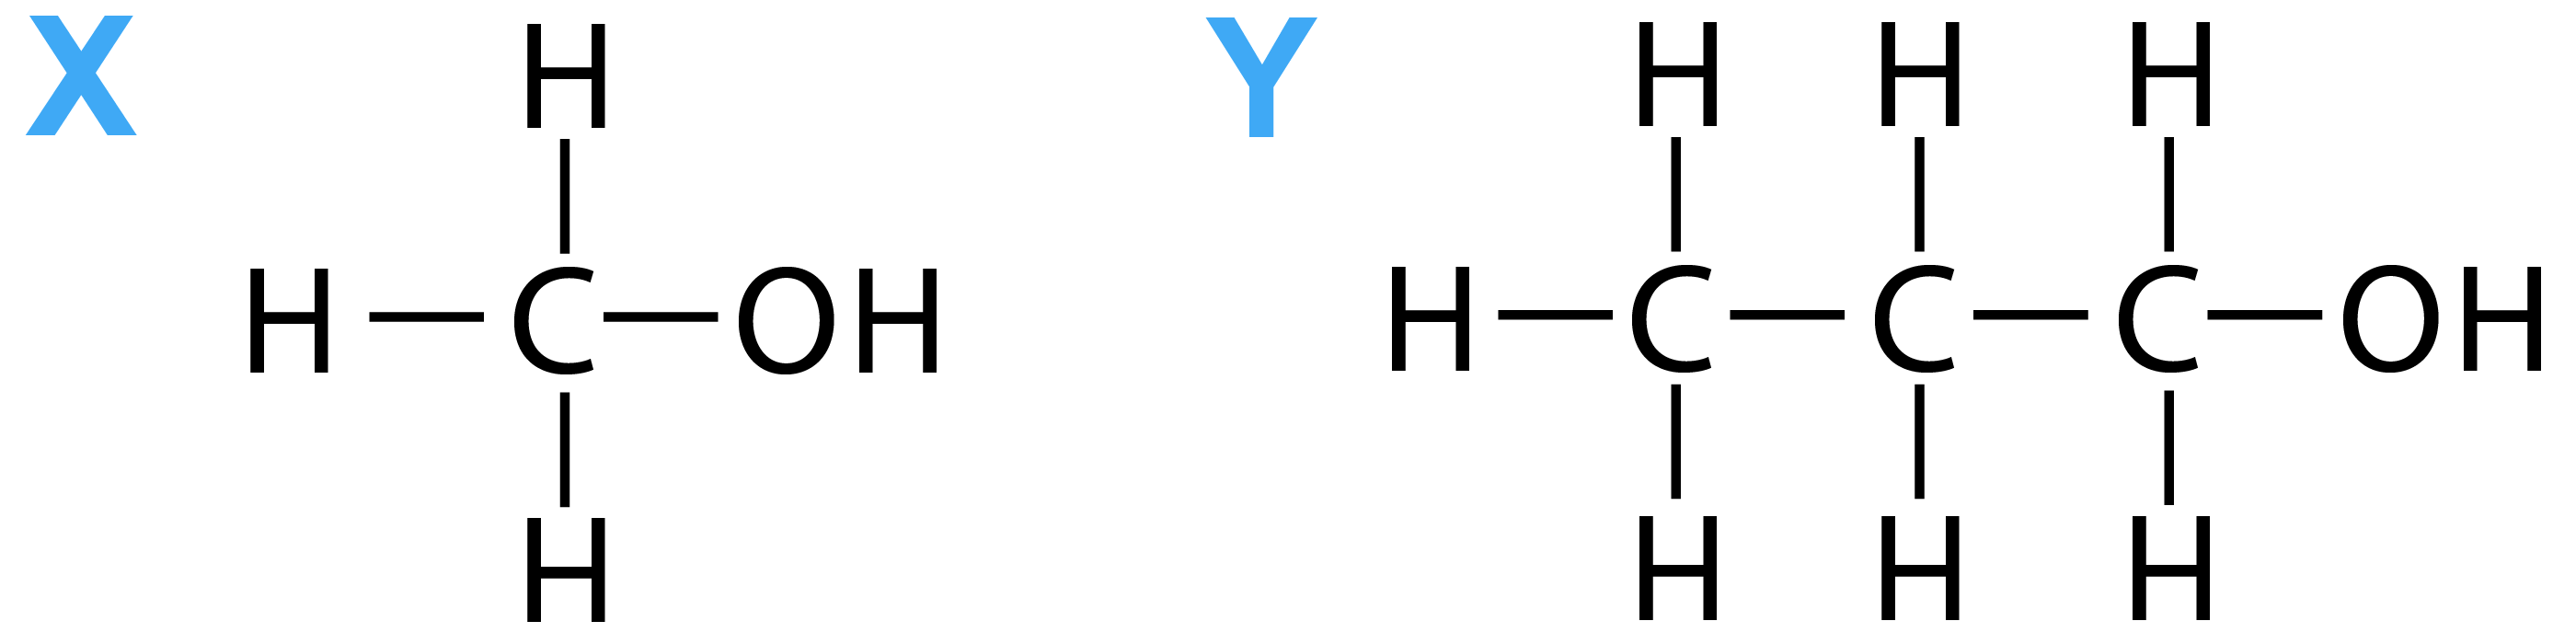 alcohols X and Y